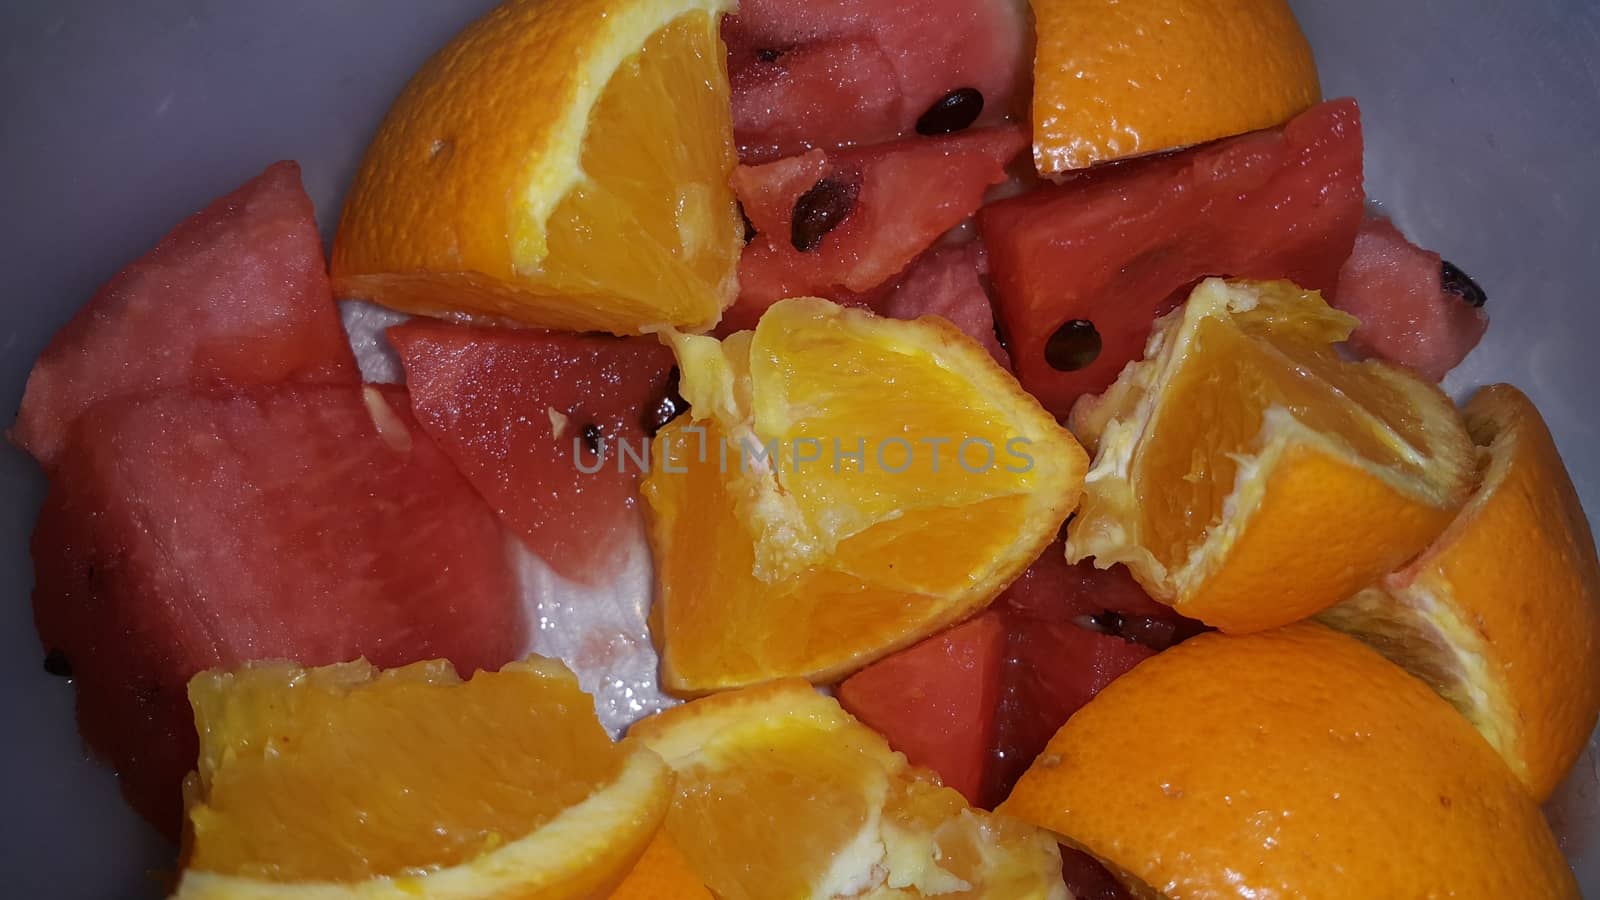 Closeup view of mixed fruits slices of citrus oranges and sweet red watermelon by Photochowk